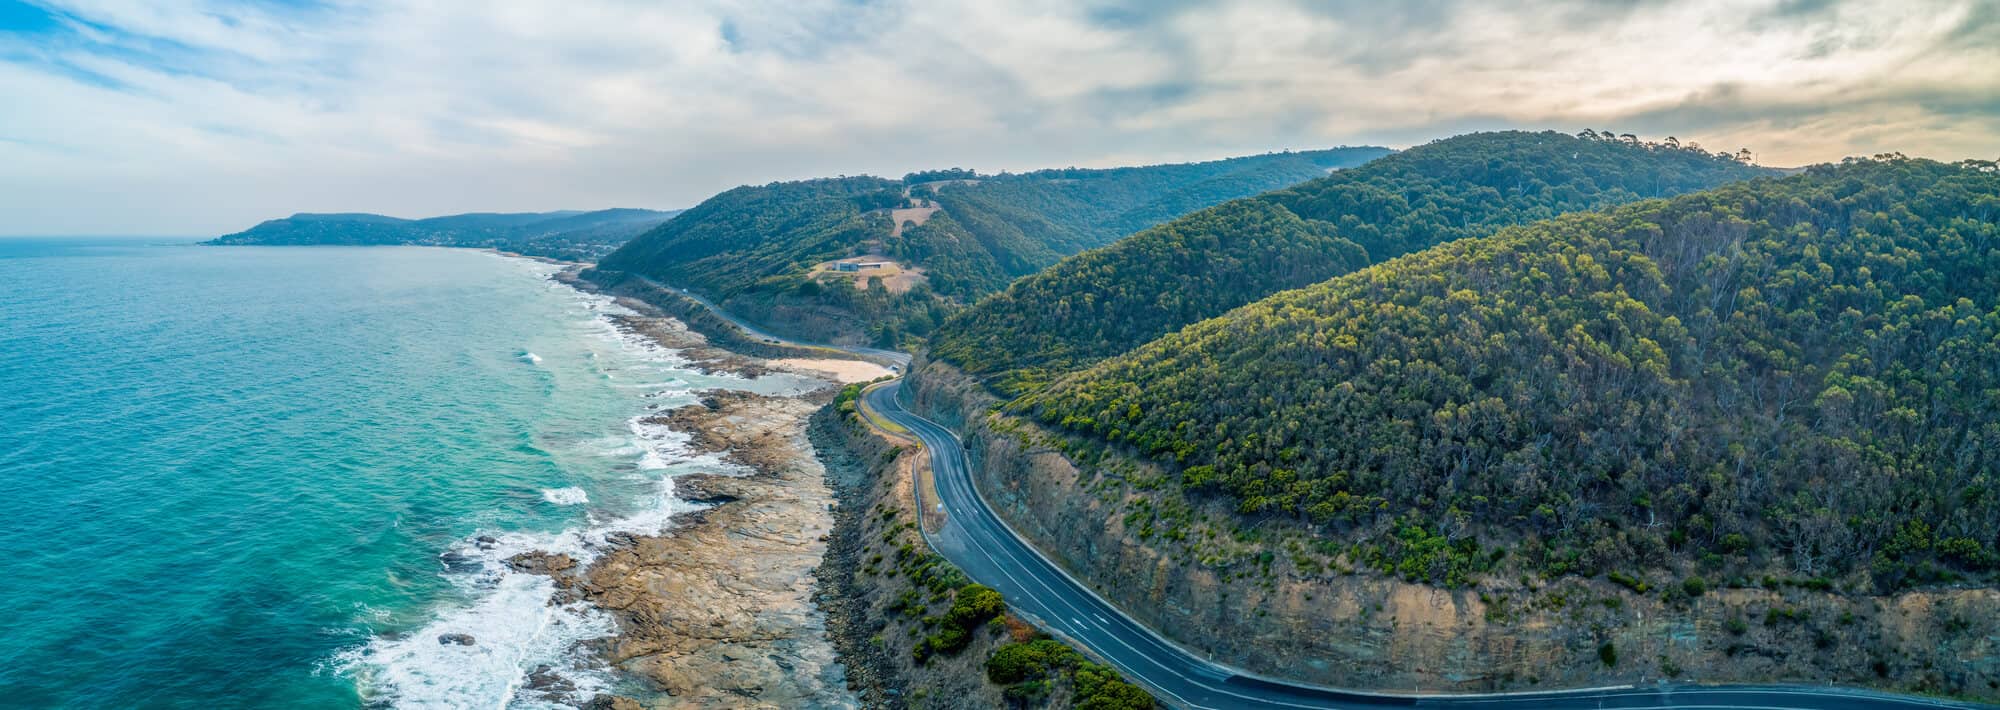 Guide to Touring The Great Ocean Road Header Image - Aerial View of the Great Ocean Road